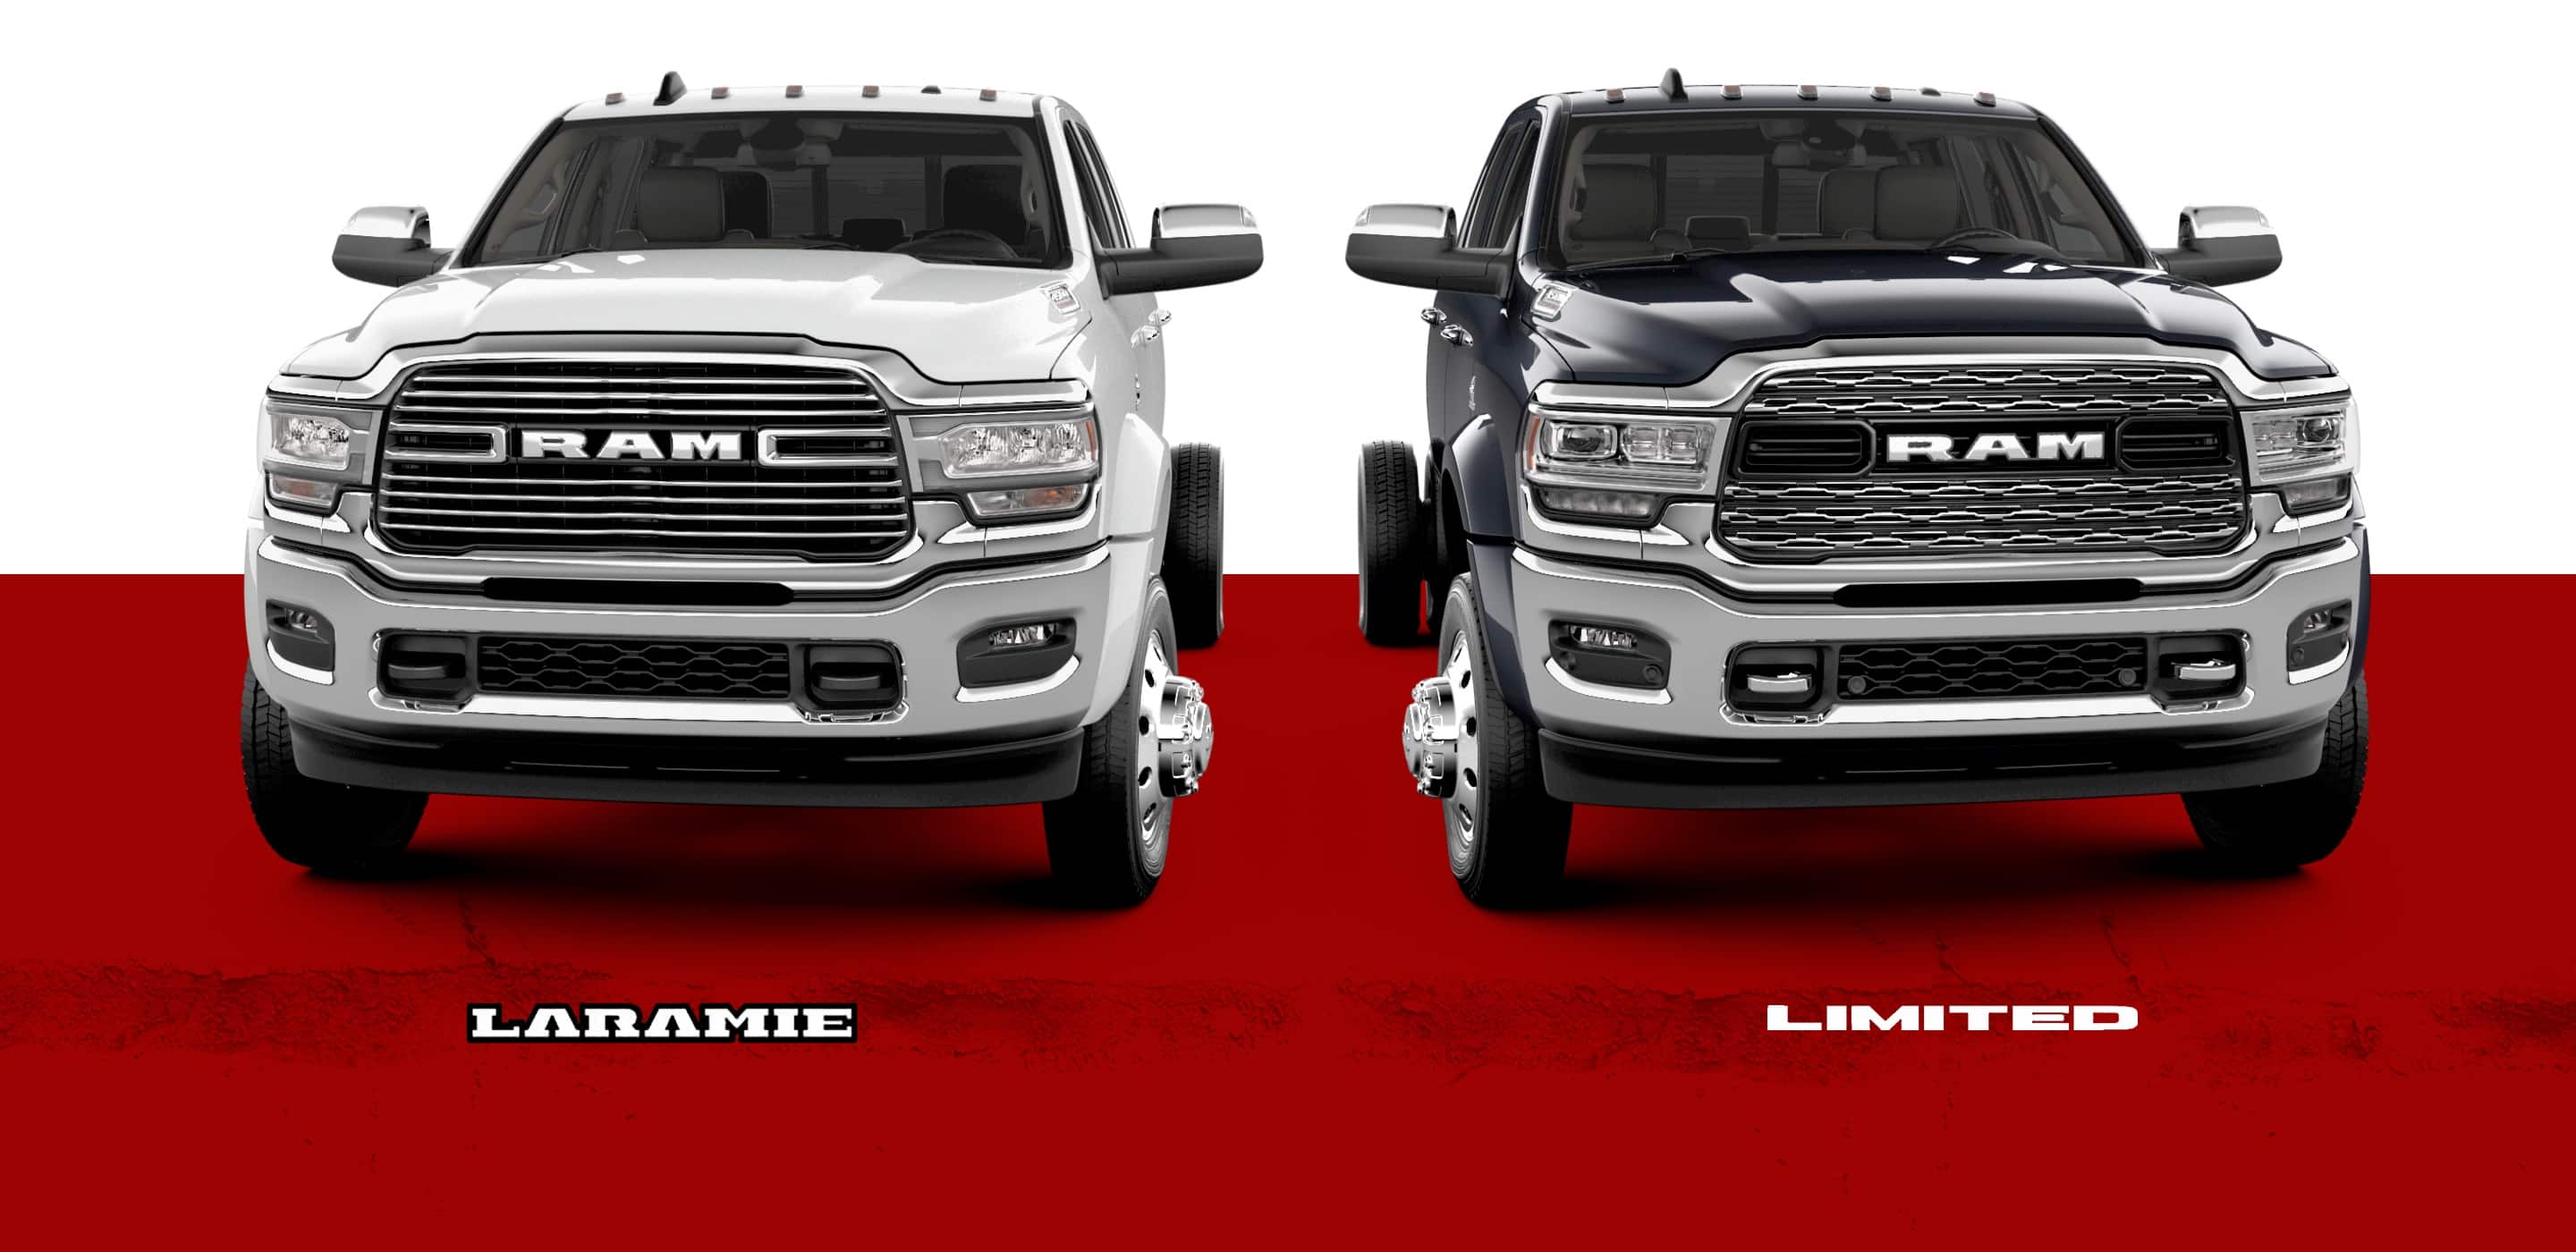 2020 Ram Trucks Chassis Cab Heavy Duty Commercial Truck